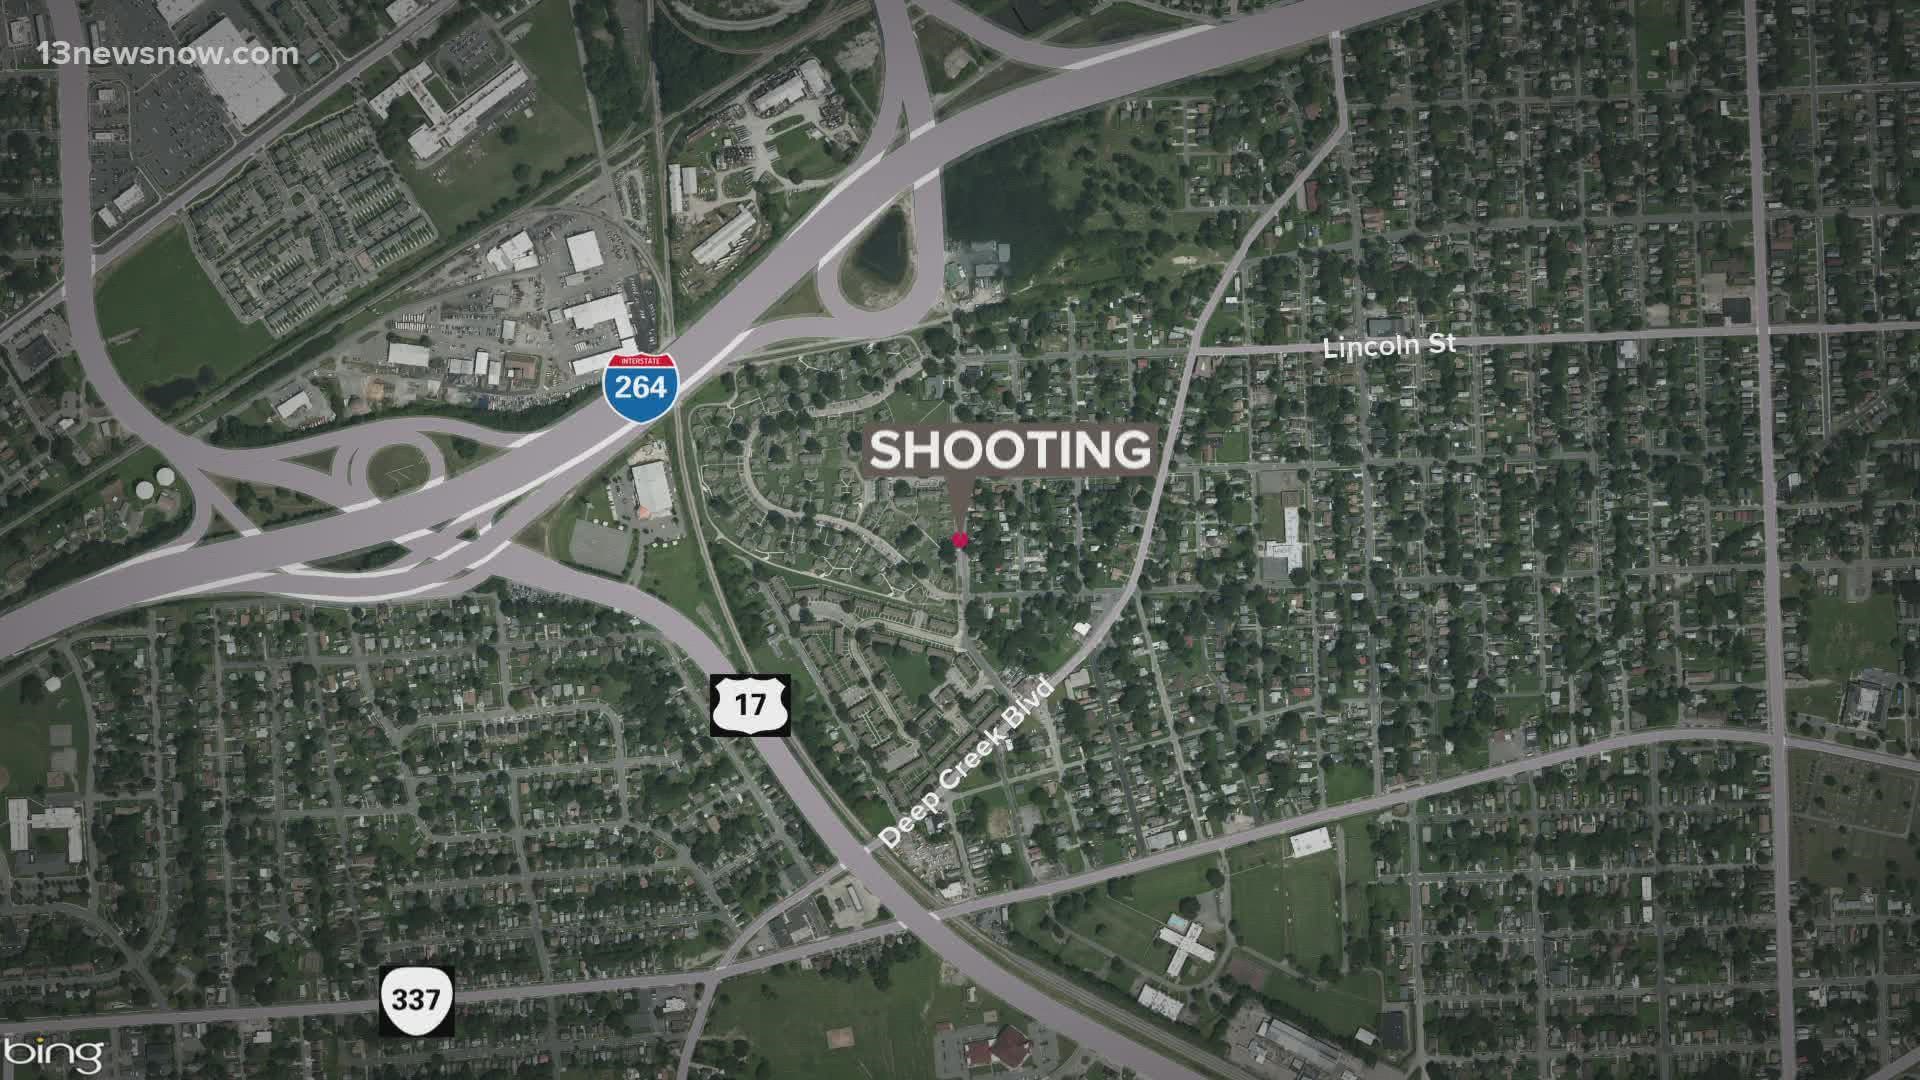 A woman was admitted to a local hospital with a serious gunshot wound Saturday around 6:27 p.m., said Portsmouth Police.